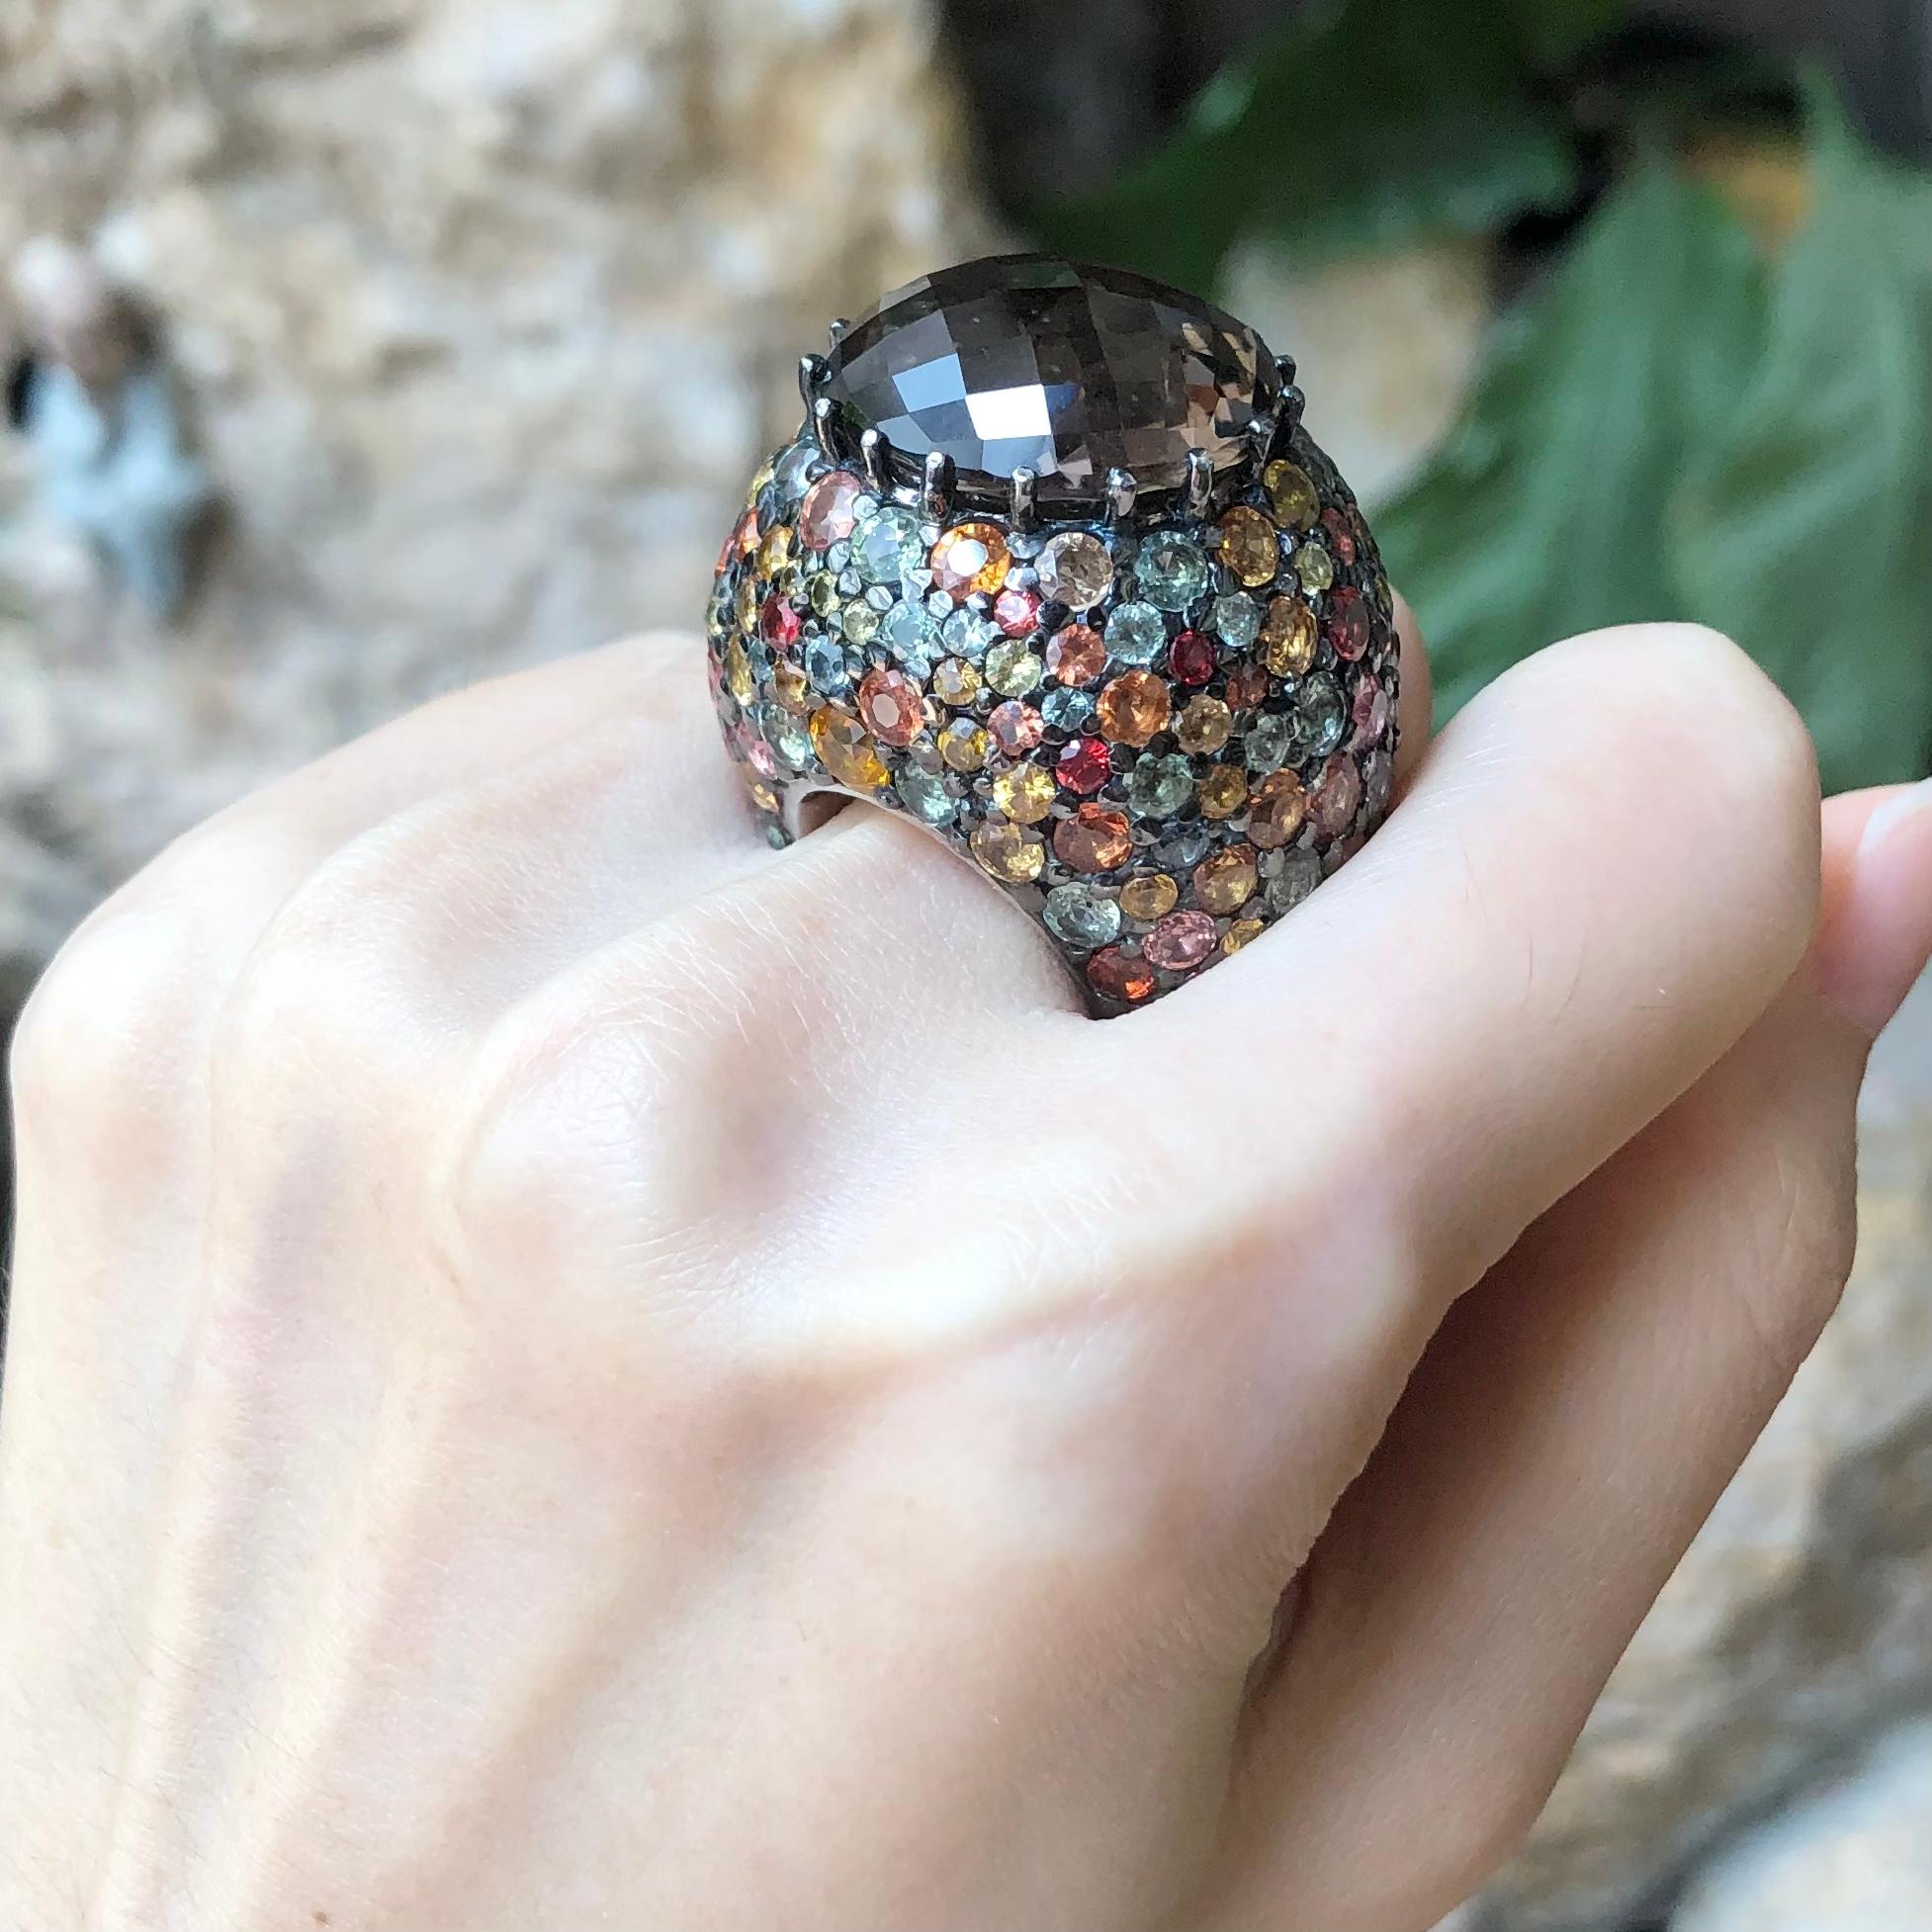 Smoky Quartz 30.0 carats and Rainbow Colour Sapphire 29.81 carats Ring set in Silver Settings

Width:  3.4 cm 
Length: 2.8 cm
Ring Size: 54
Total Weight: 47.76 grams

*Please note that the silver setting is plated with rhodium to promote shine and